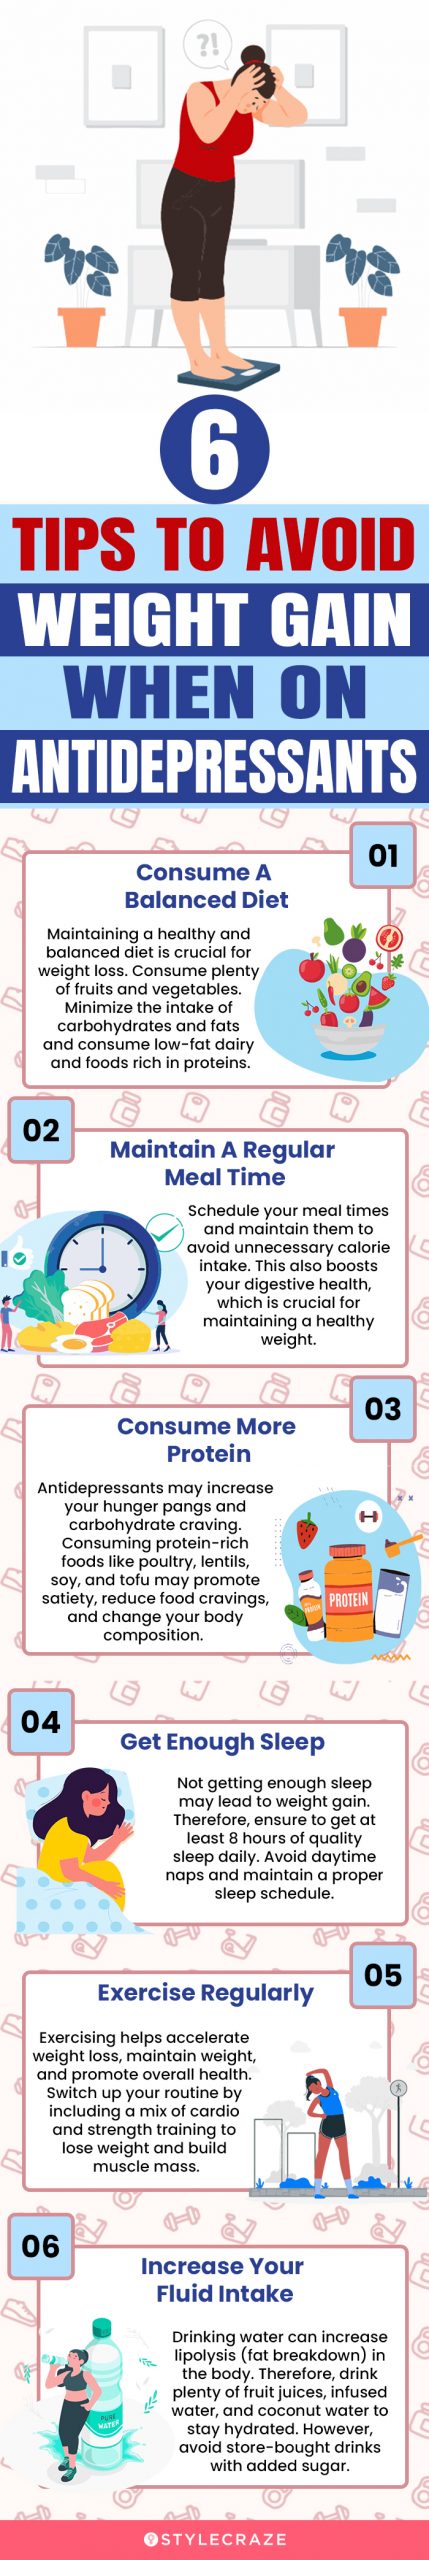 6 tips to avoid weight gain when on antidepressants(infographic)